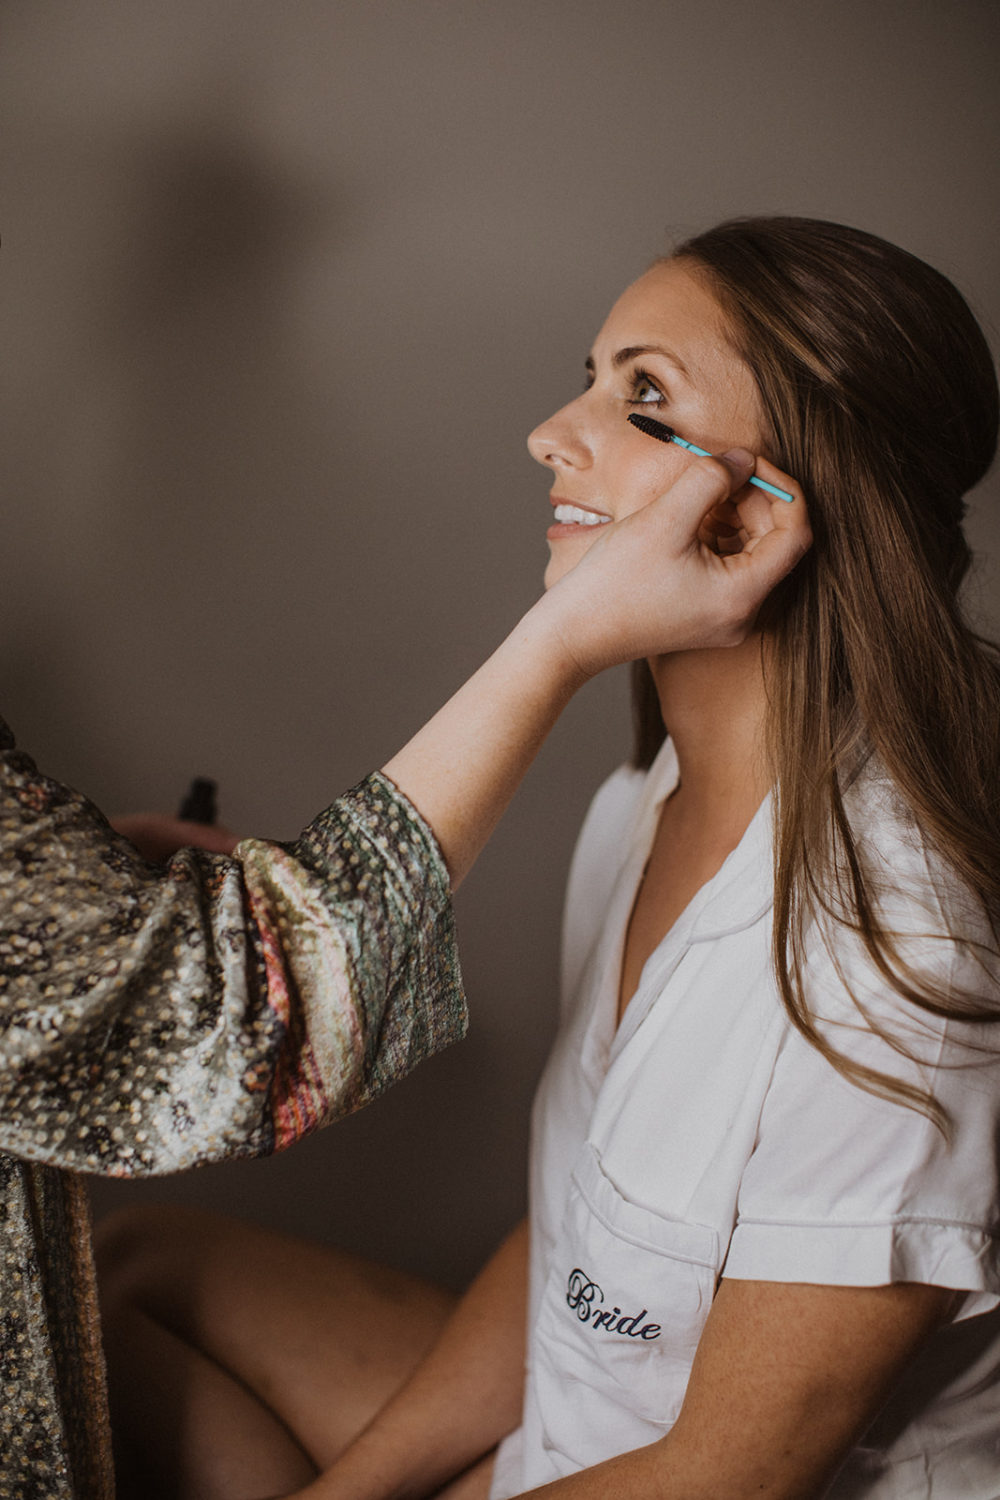 Bride gets makeup done during wedding day getting ready